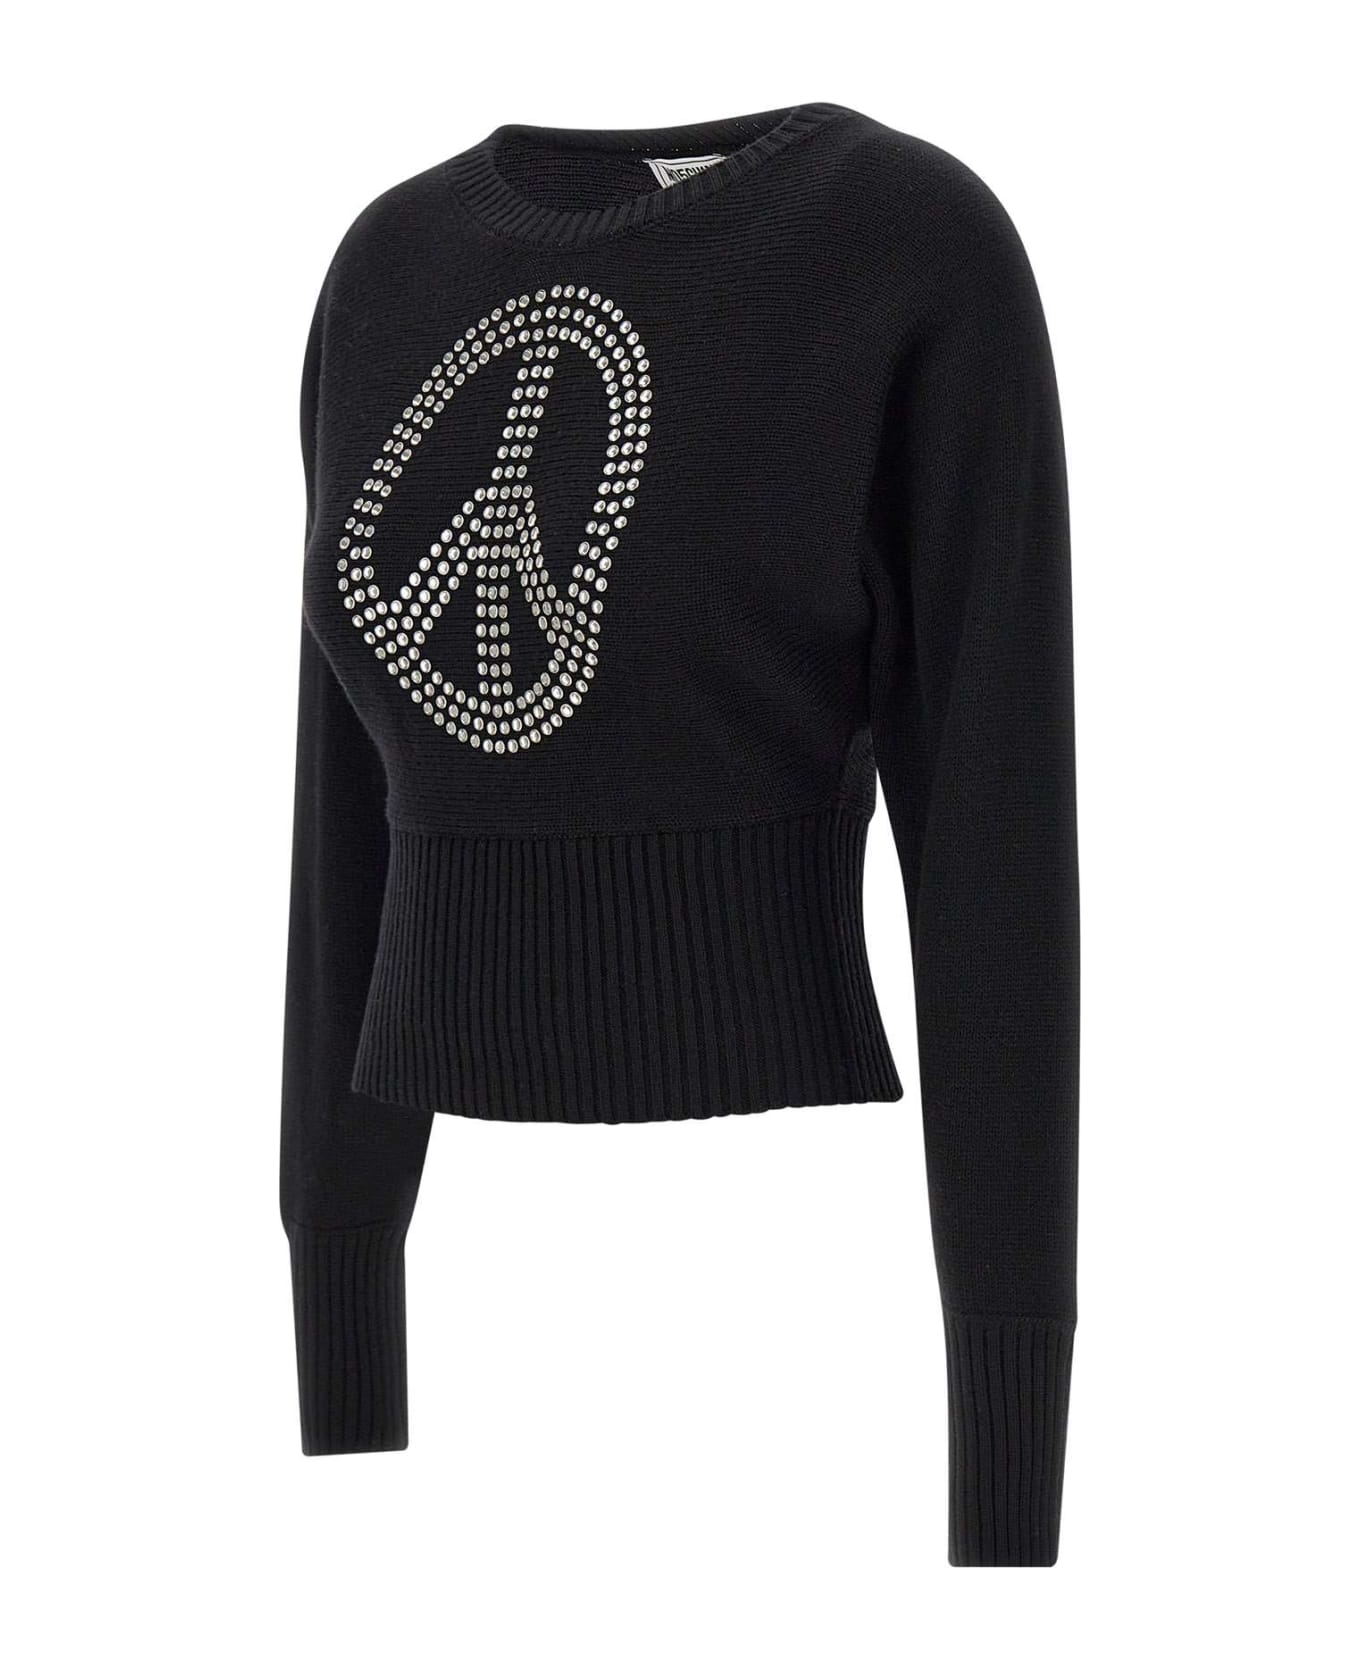 M05CH1N0 Jeans 'peace Symbol' Wool Blend Pullover - Black